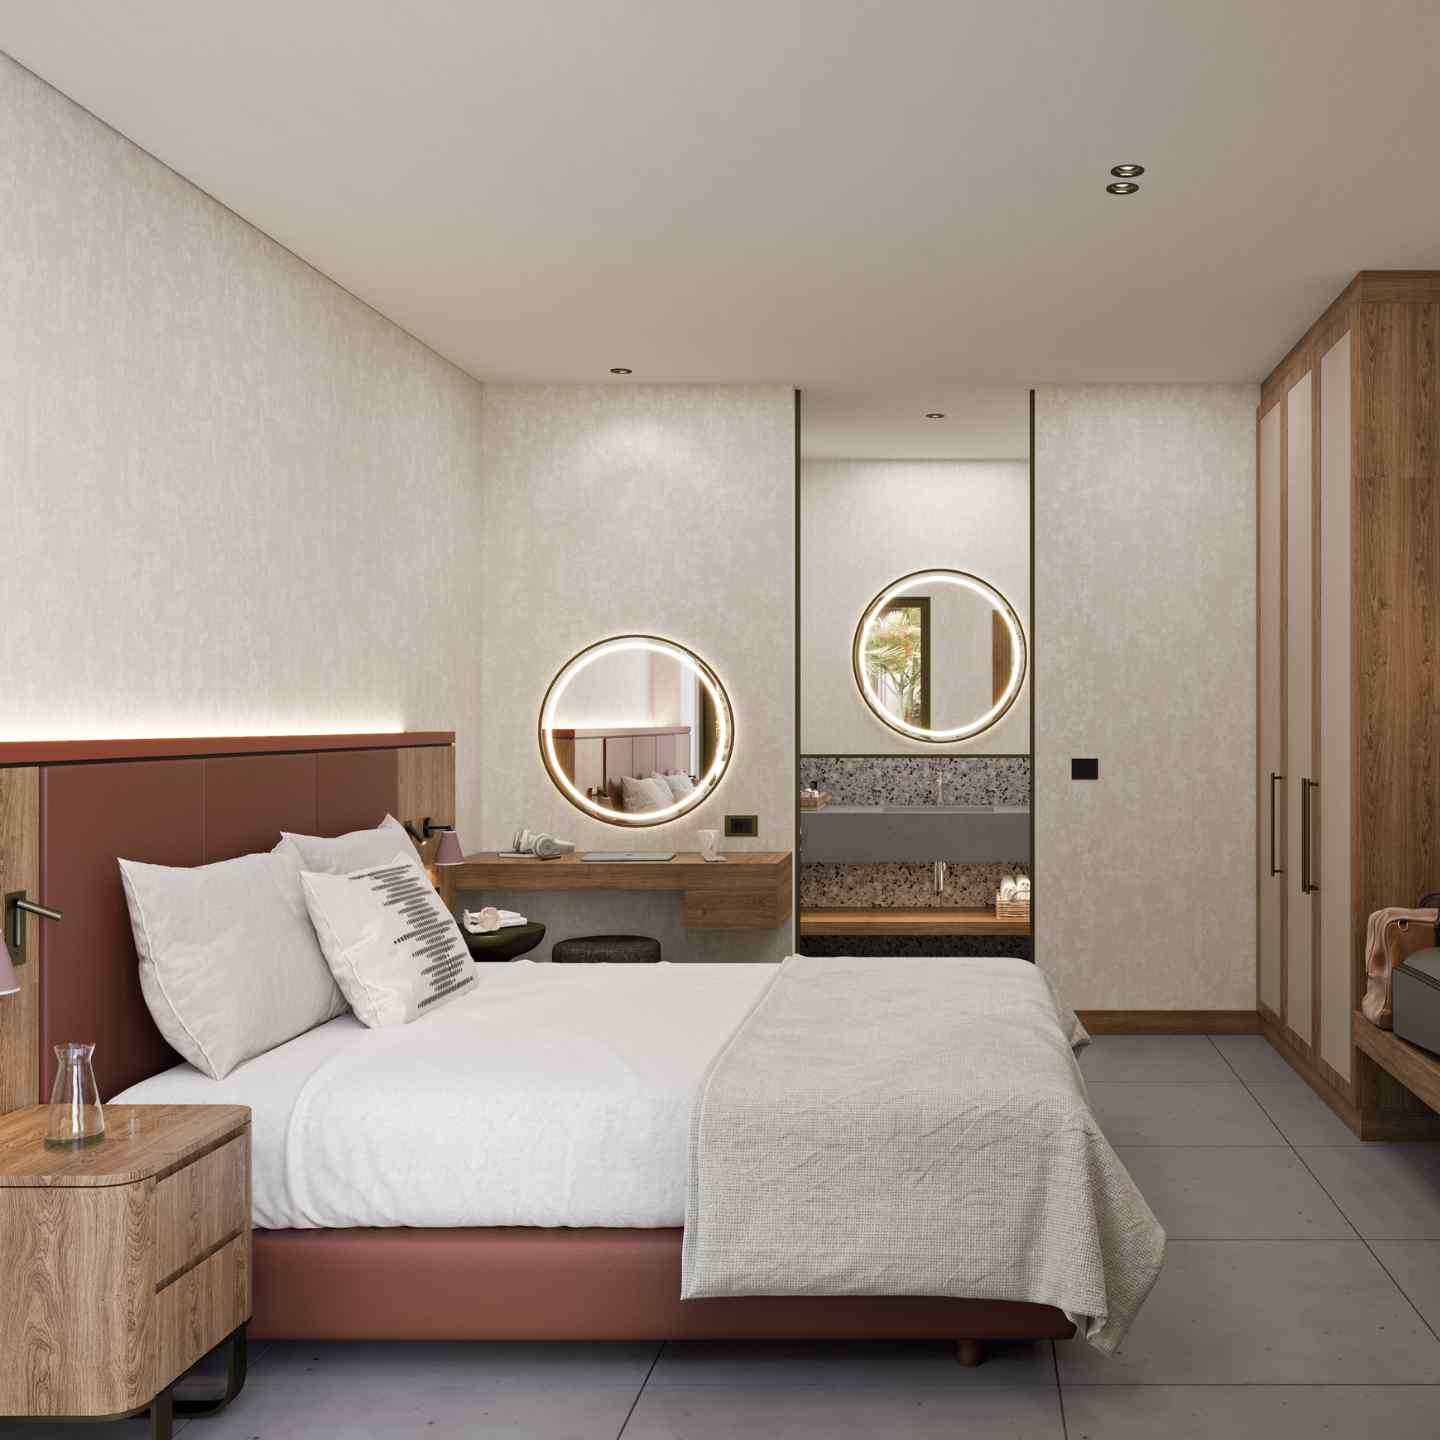 Side of large bed with wooden frame and beige bedding with small wooden bedside table, and two round circular mirrors on the walls, and wardrobe in the background